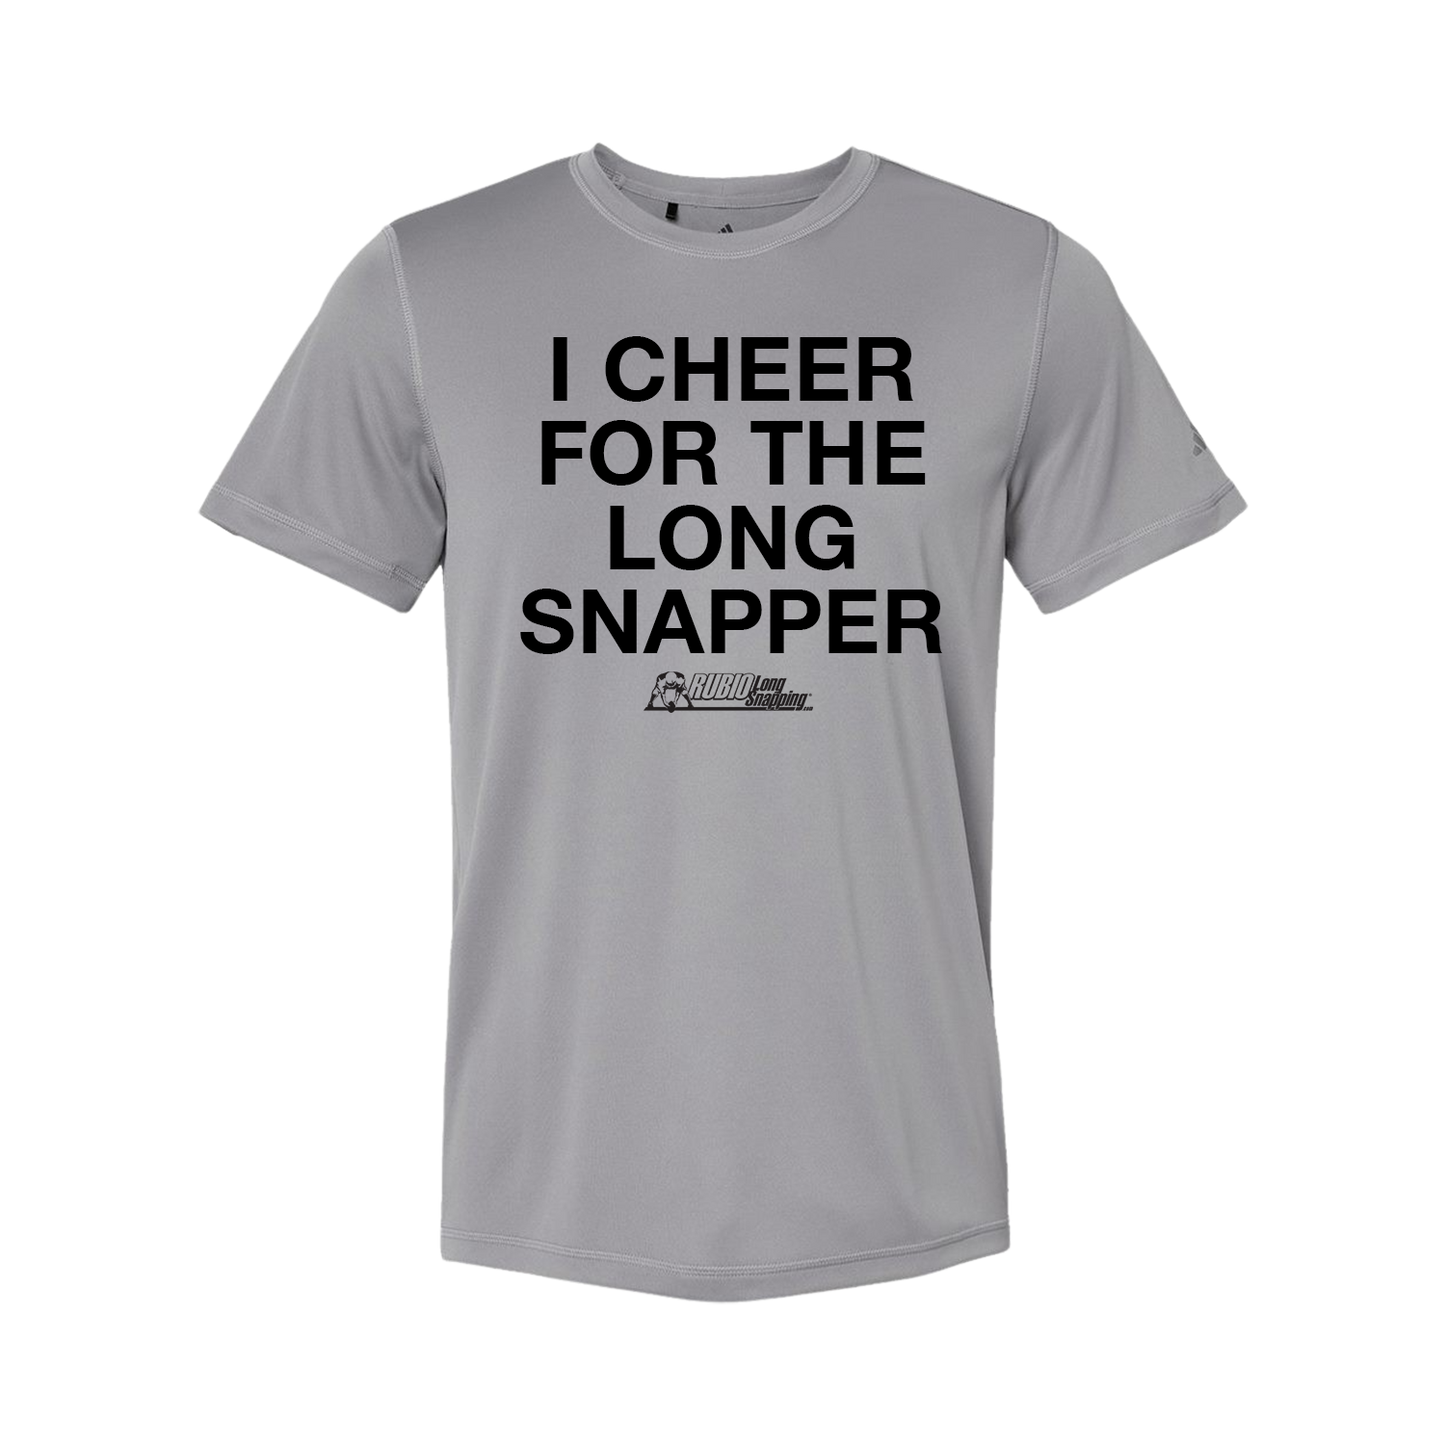 Cheer For The Long Snapper Grey Tee